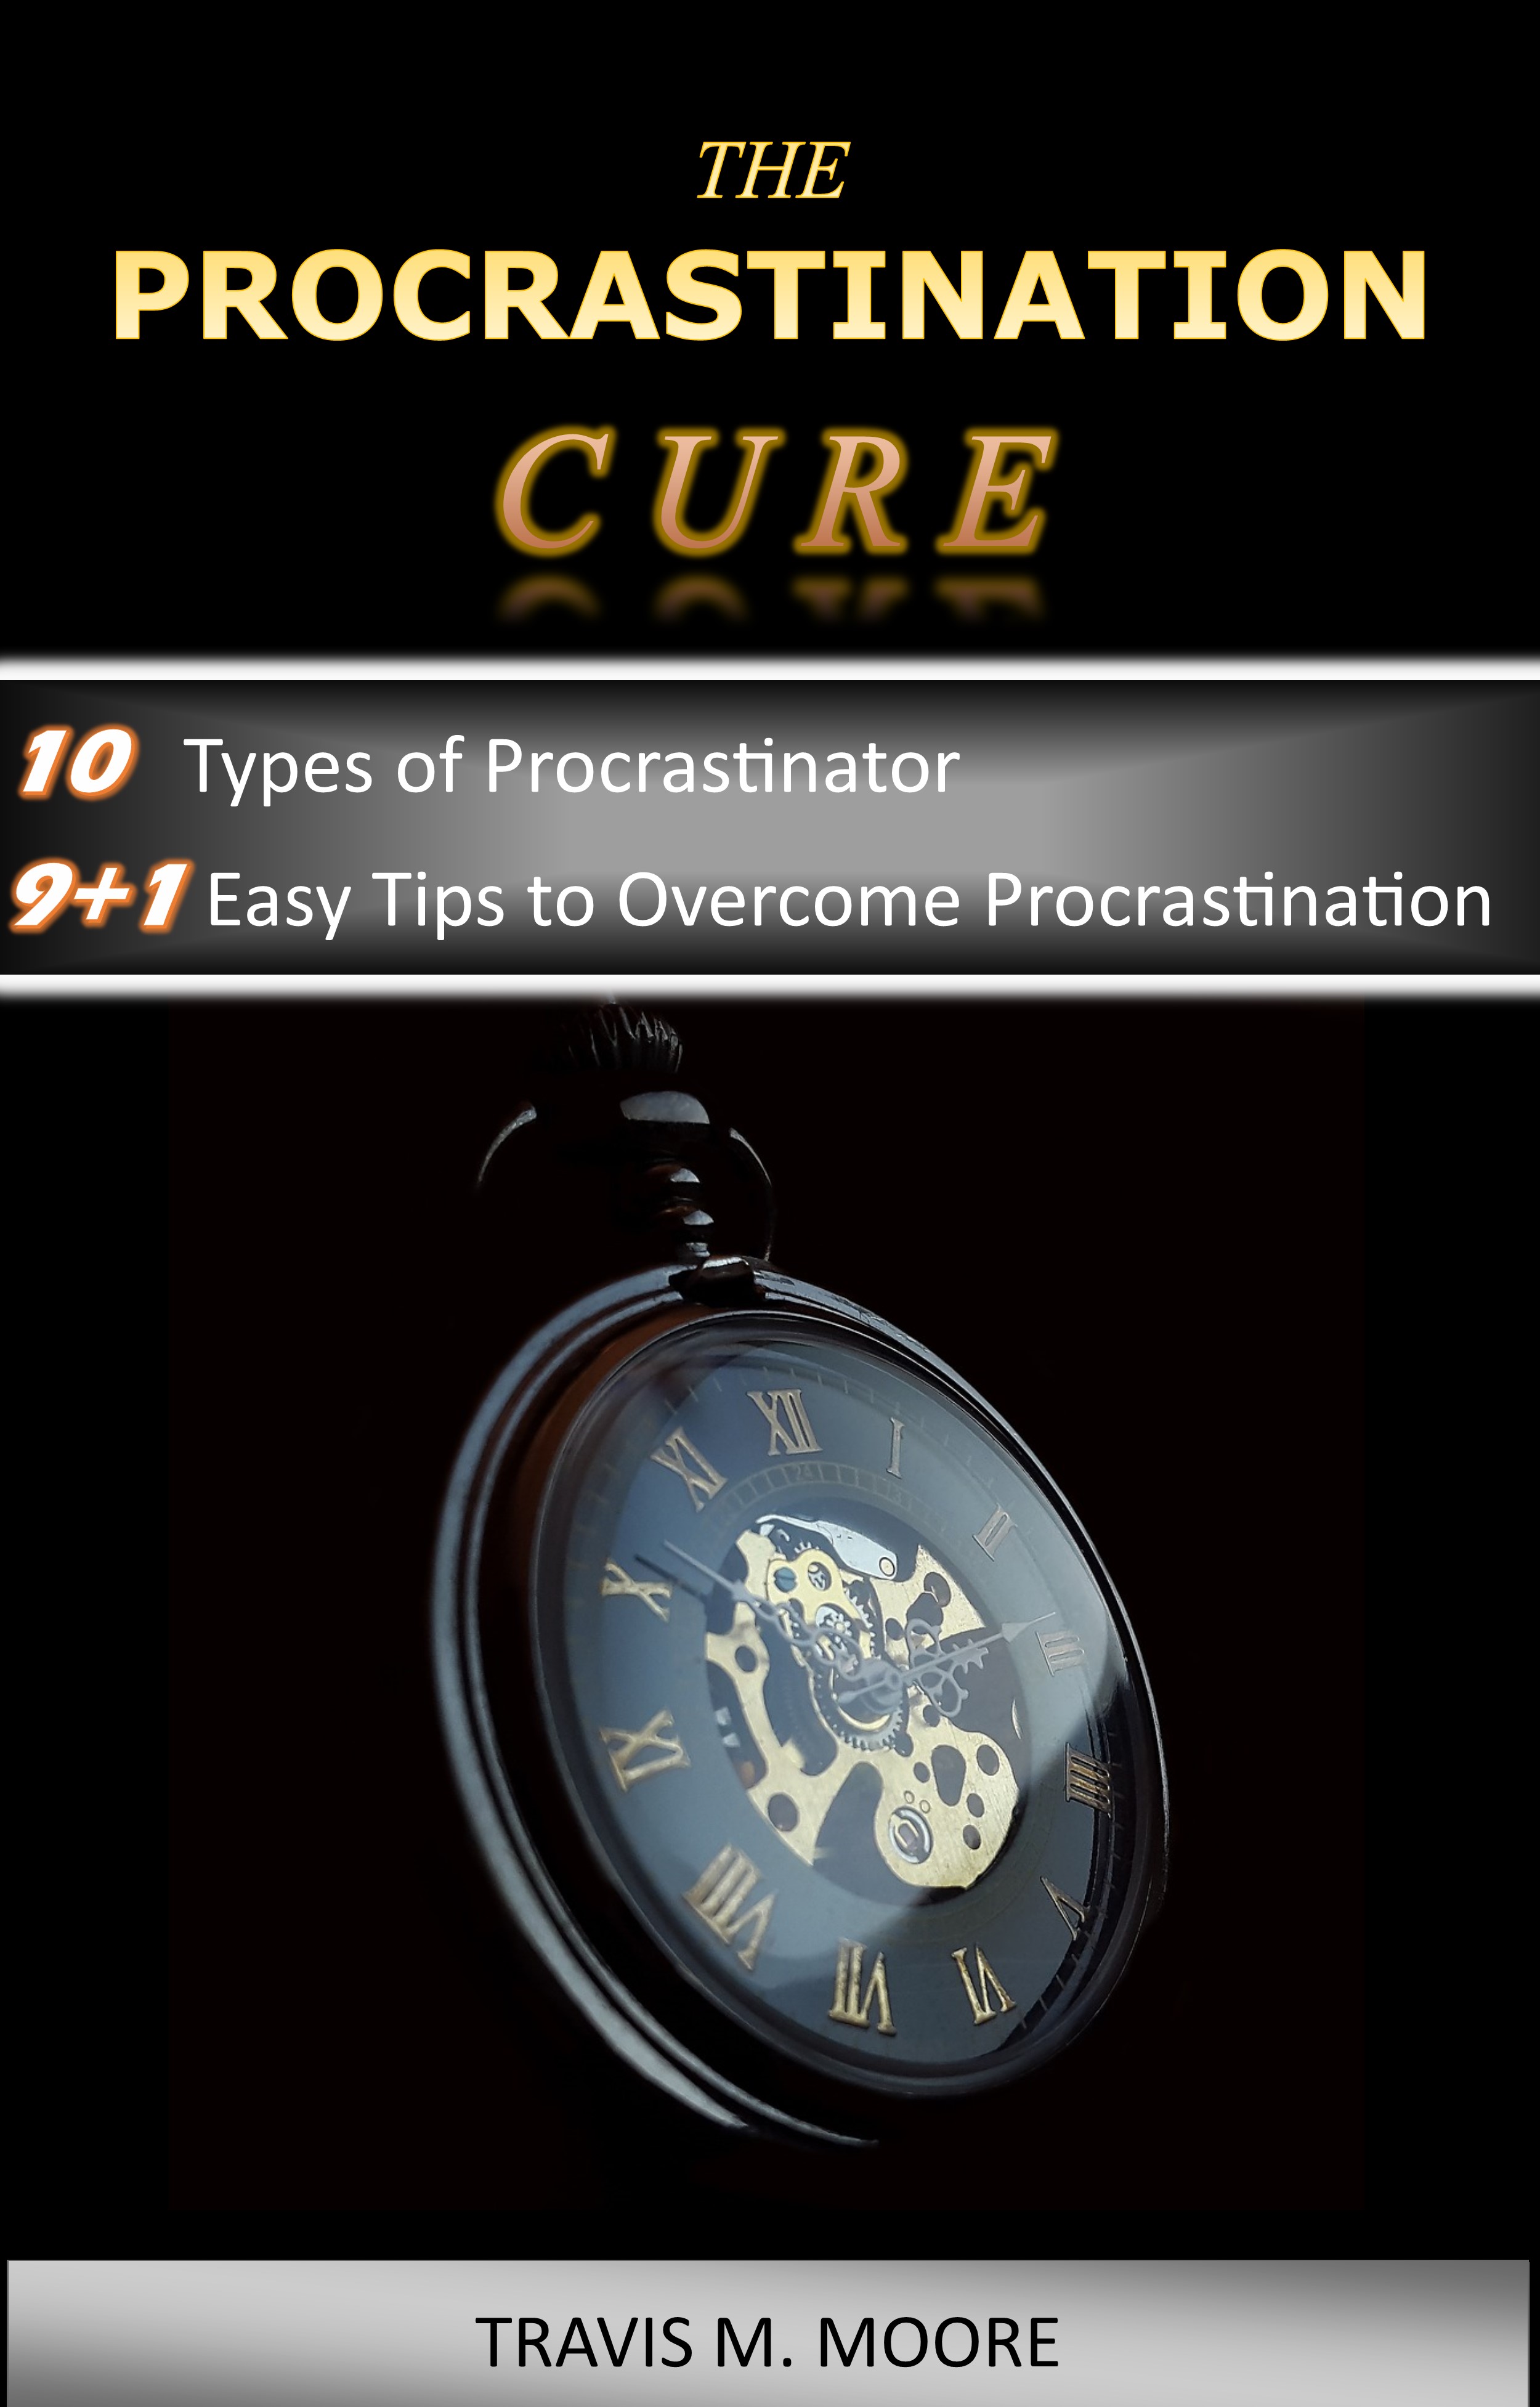 FREE: The Procrastination Cure: 10 Types of Procrastinator! 9 +1 Easy Tips to Overcome Your Procrastination by Travis M. Moore